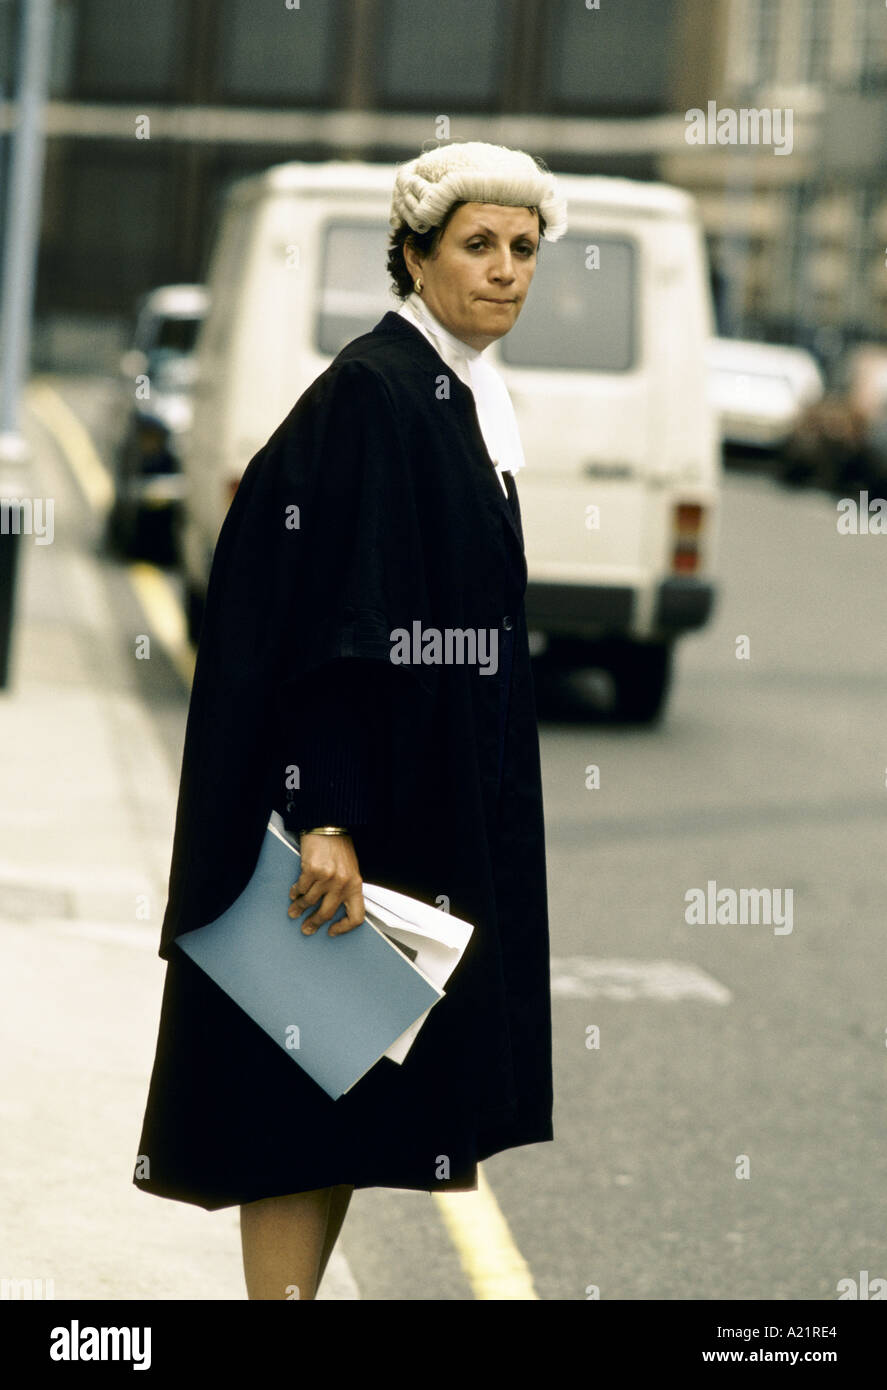 A female barrister, The High Court, London Stock Photo